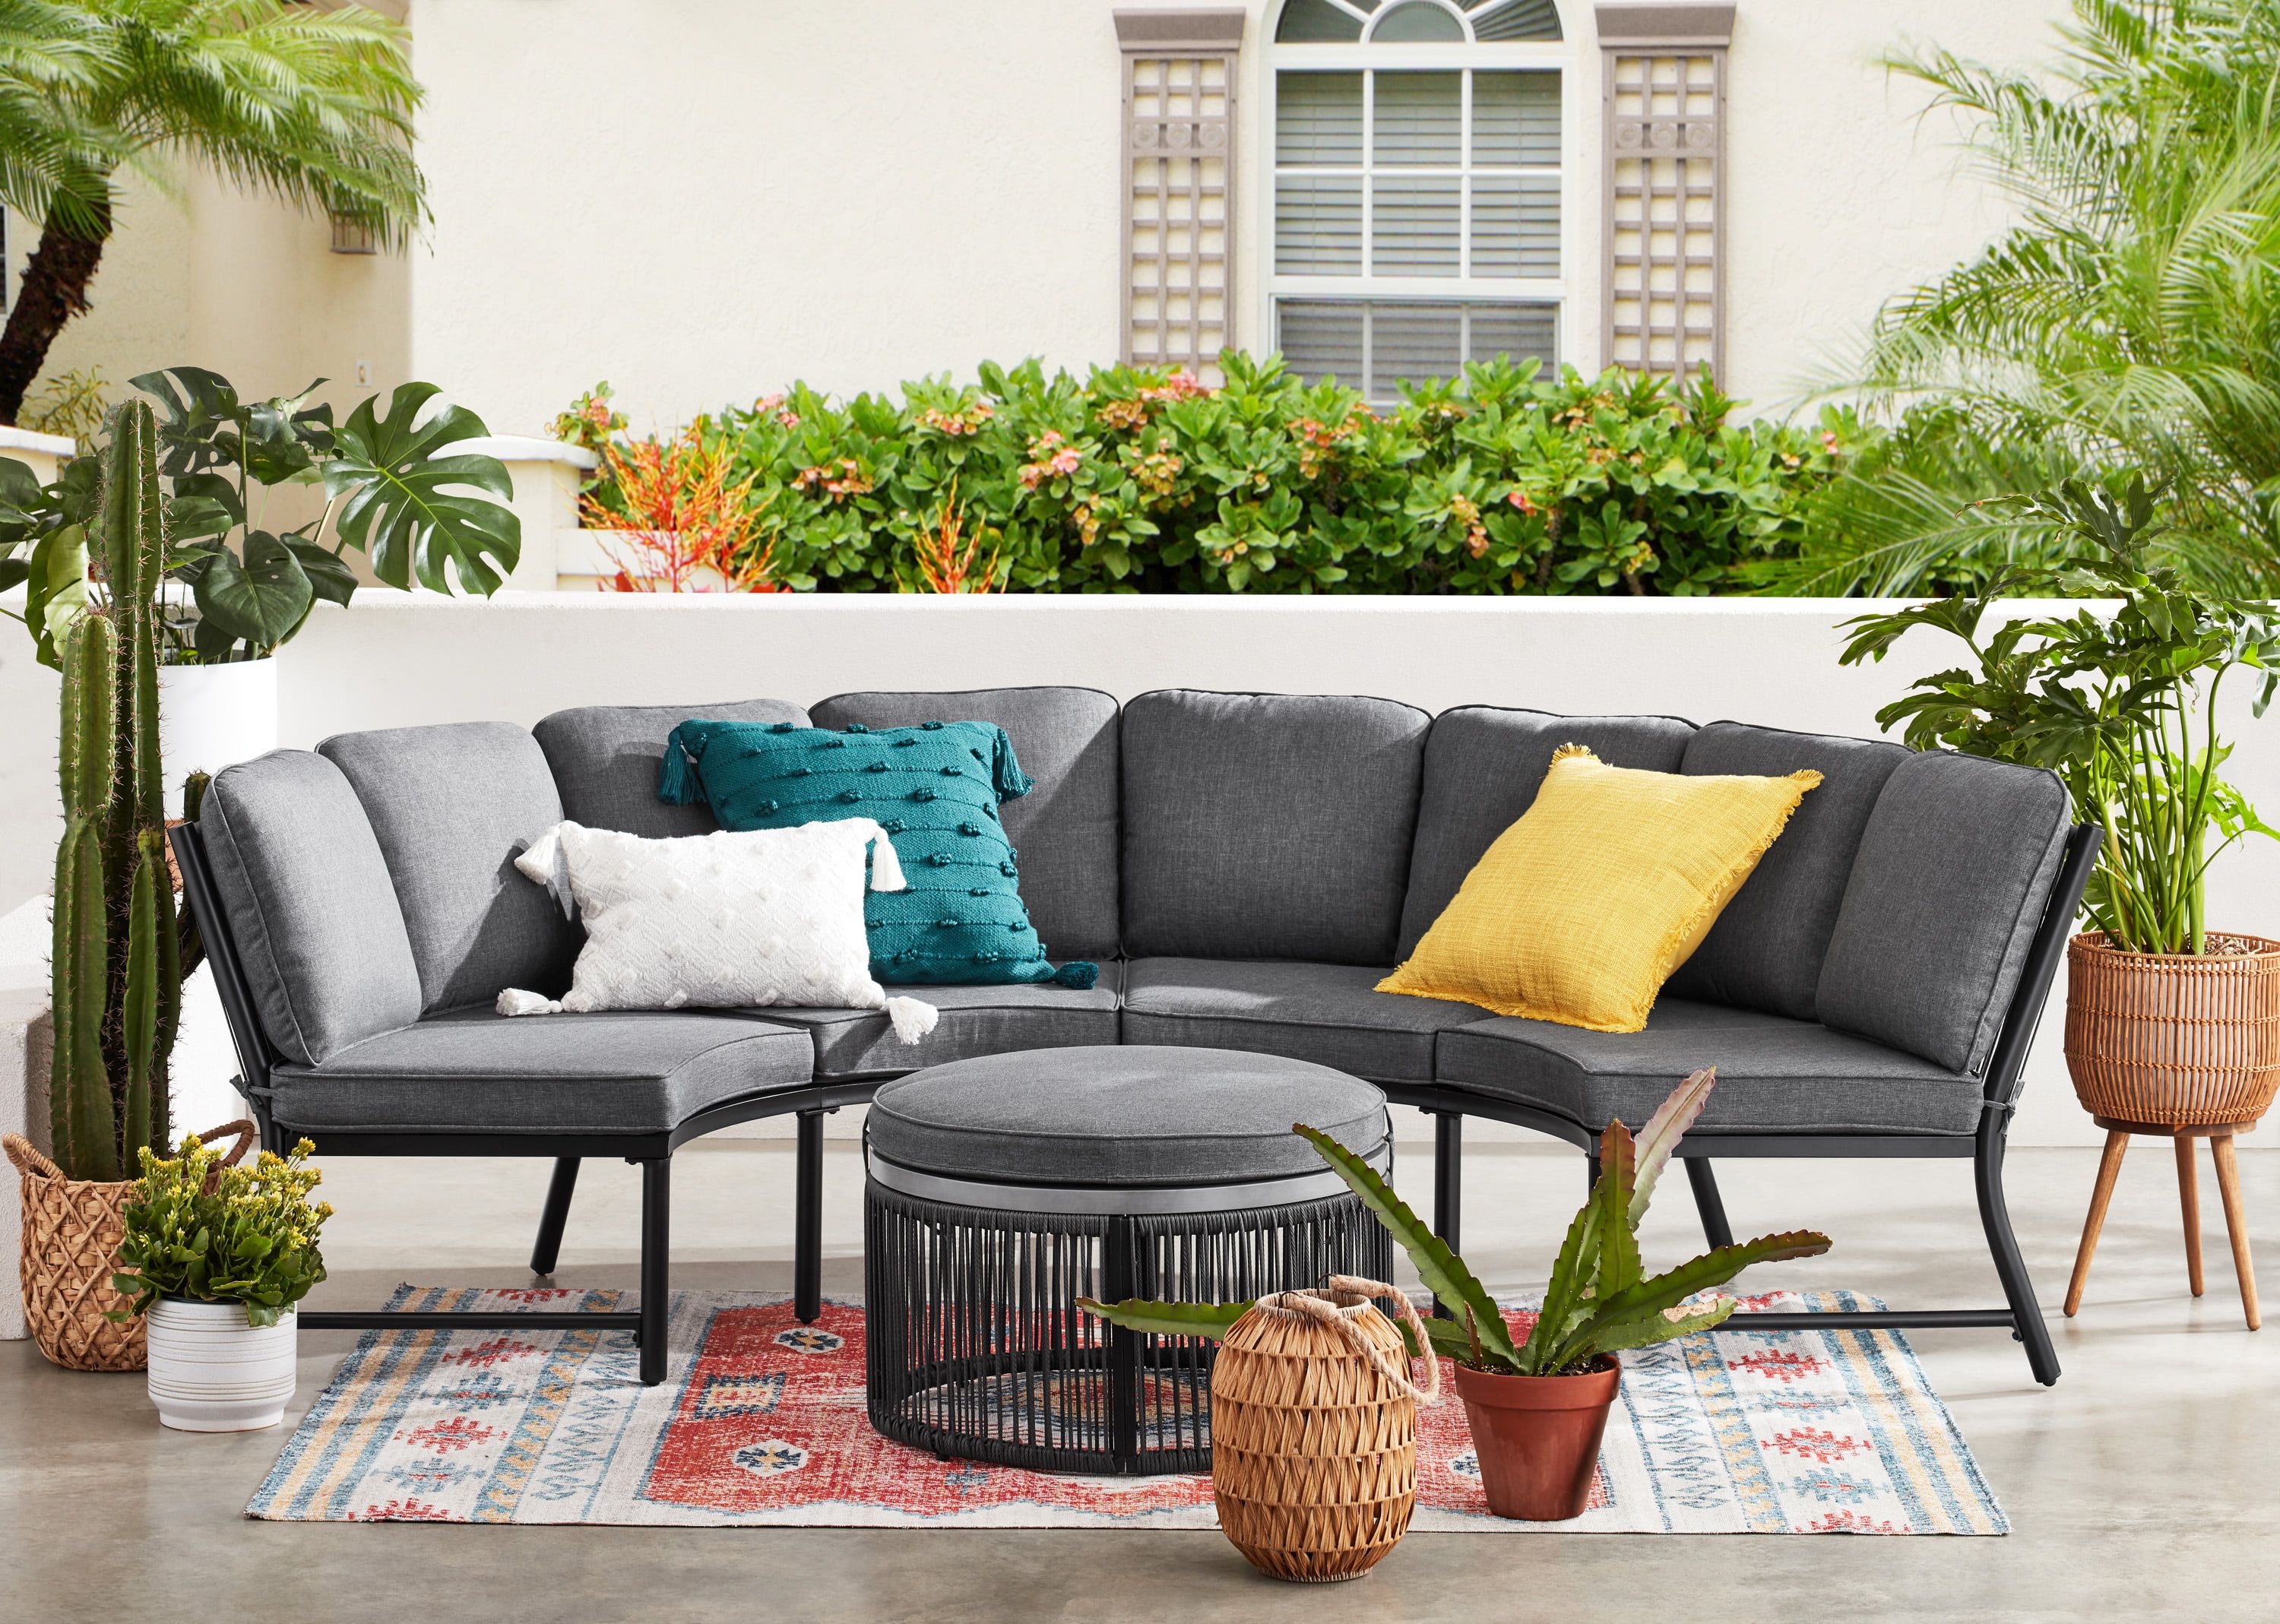 Famous 3 Piece Curved Sectional Set In Mainstays Lawson Ridge 3 Piece Curved Sectional Set – Walmart (View 3 of 15)